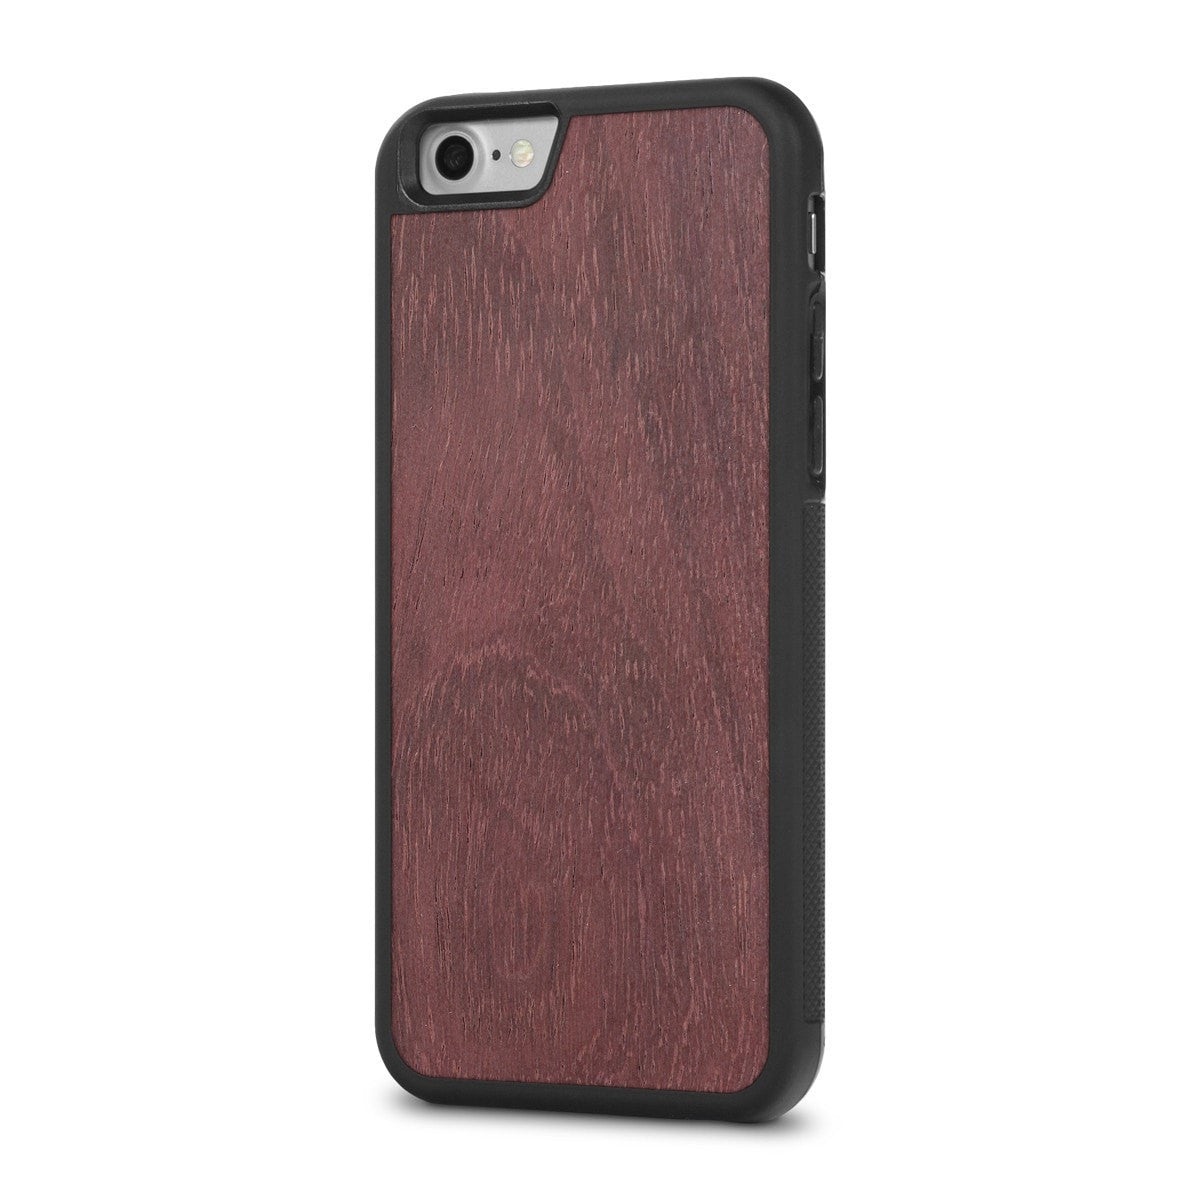  iPhone 7 —  #WoodBack Explorer Case - Cover-Up - 1